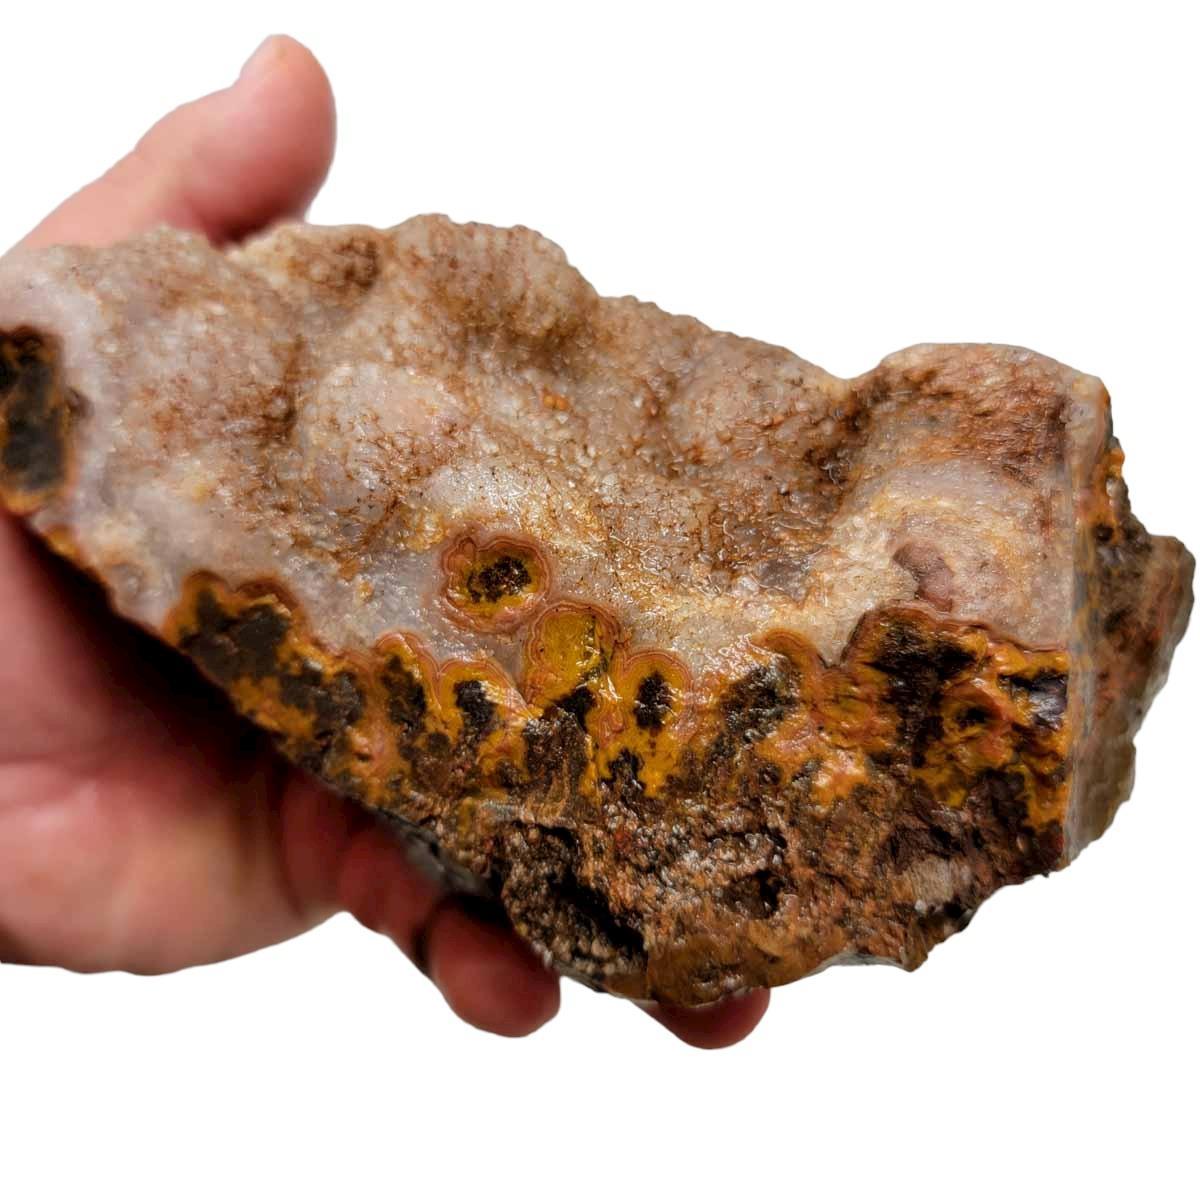 Moroccan Plume Agate Rough Chunk! - LapidaryCentral